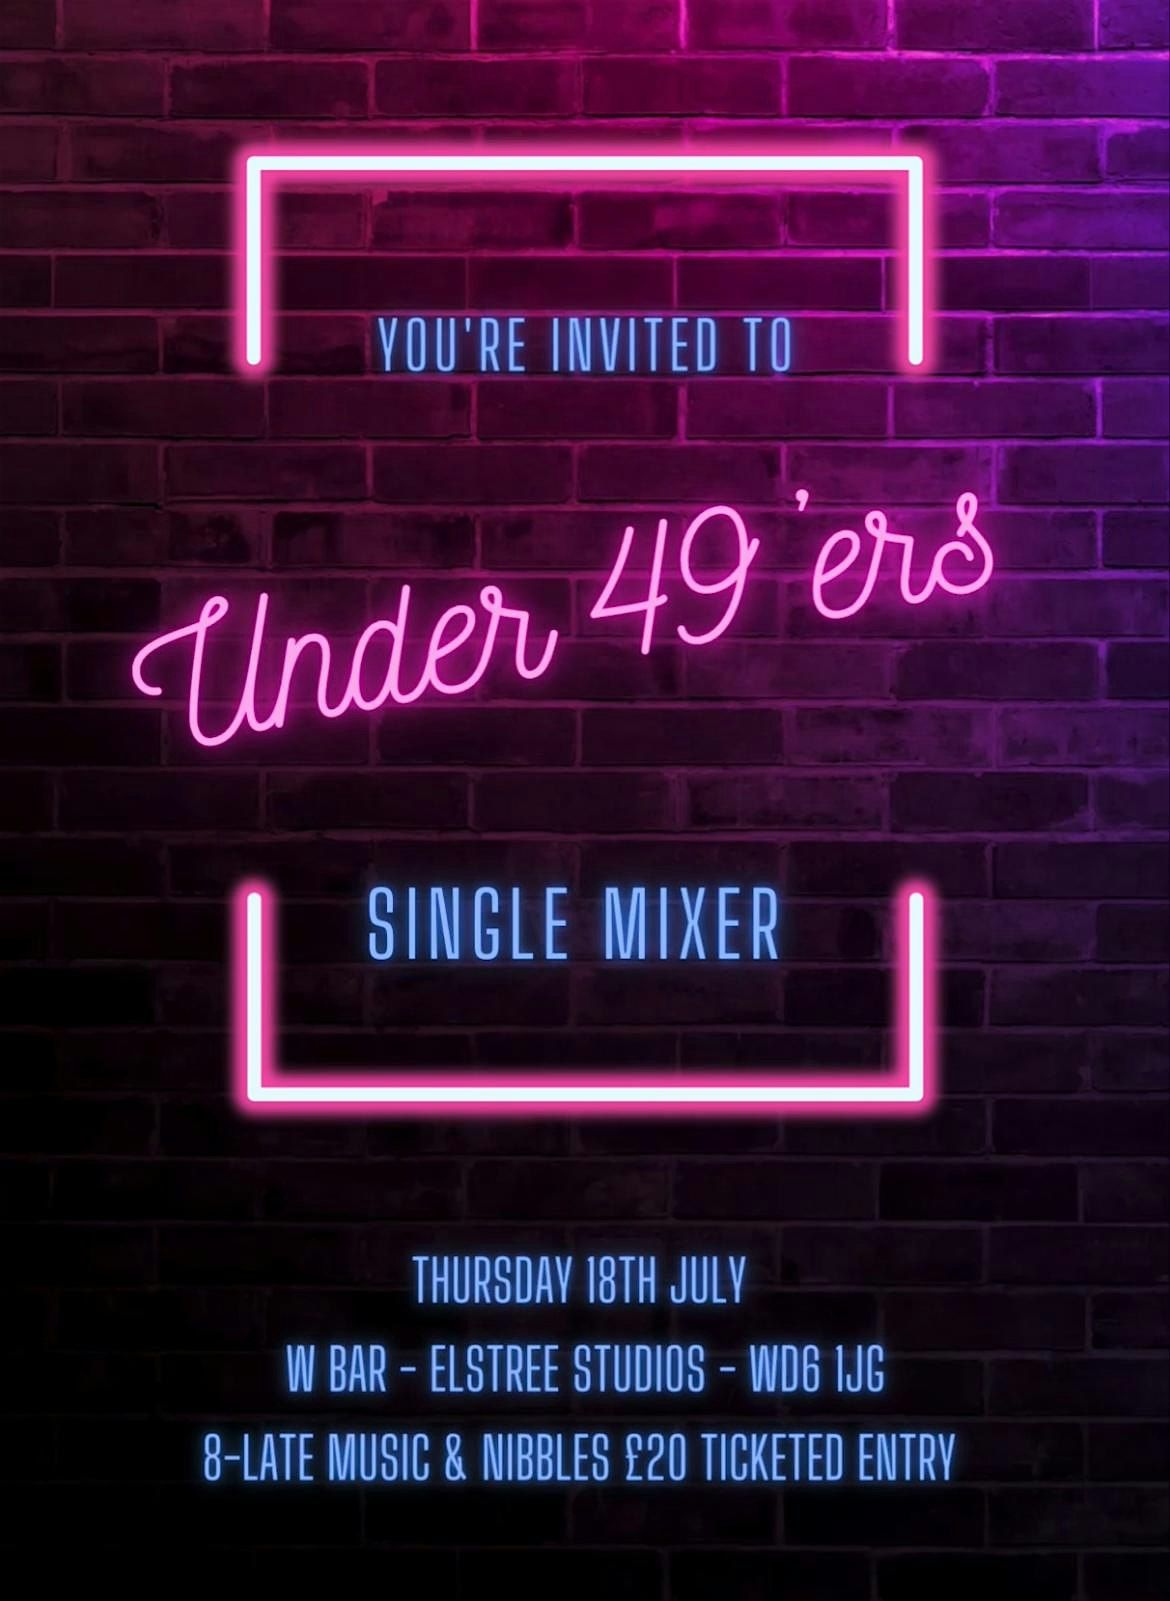 Under 49ers Single Mixer for Jewish Singles under 49!